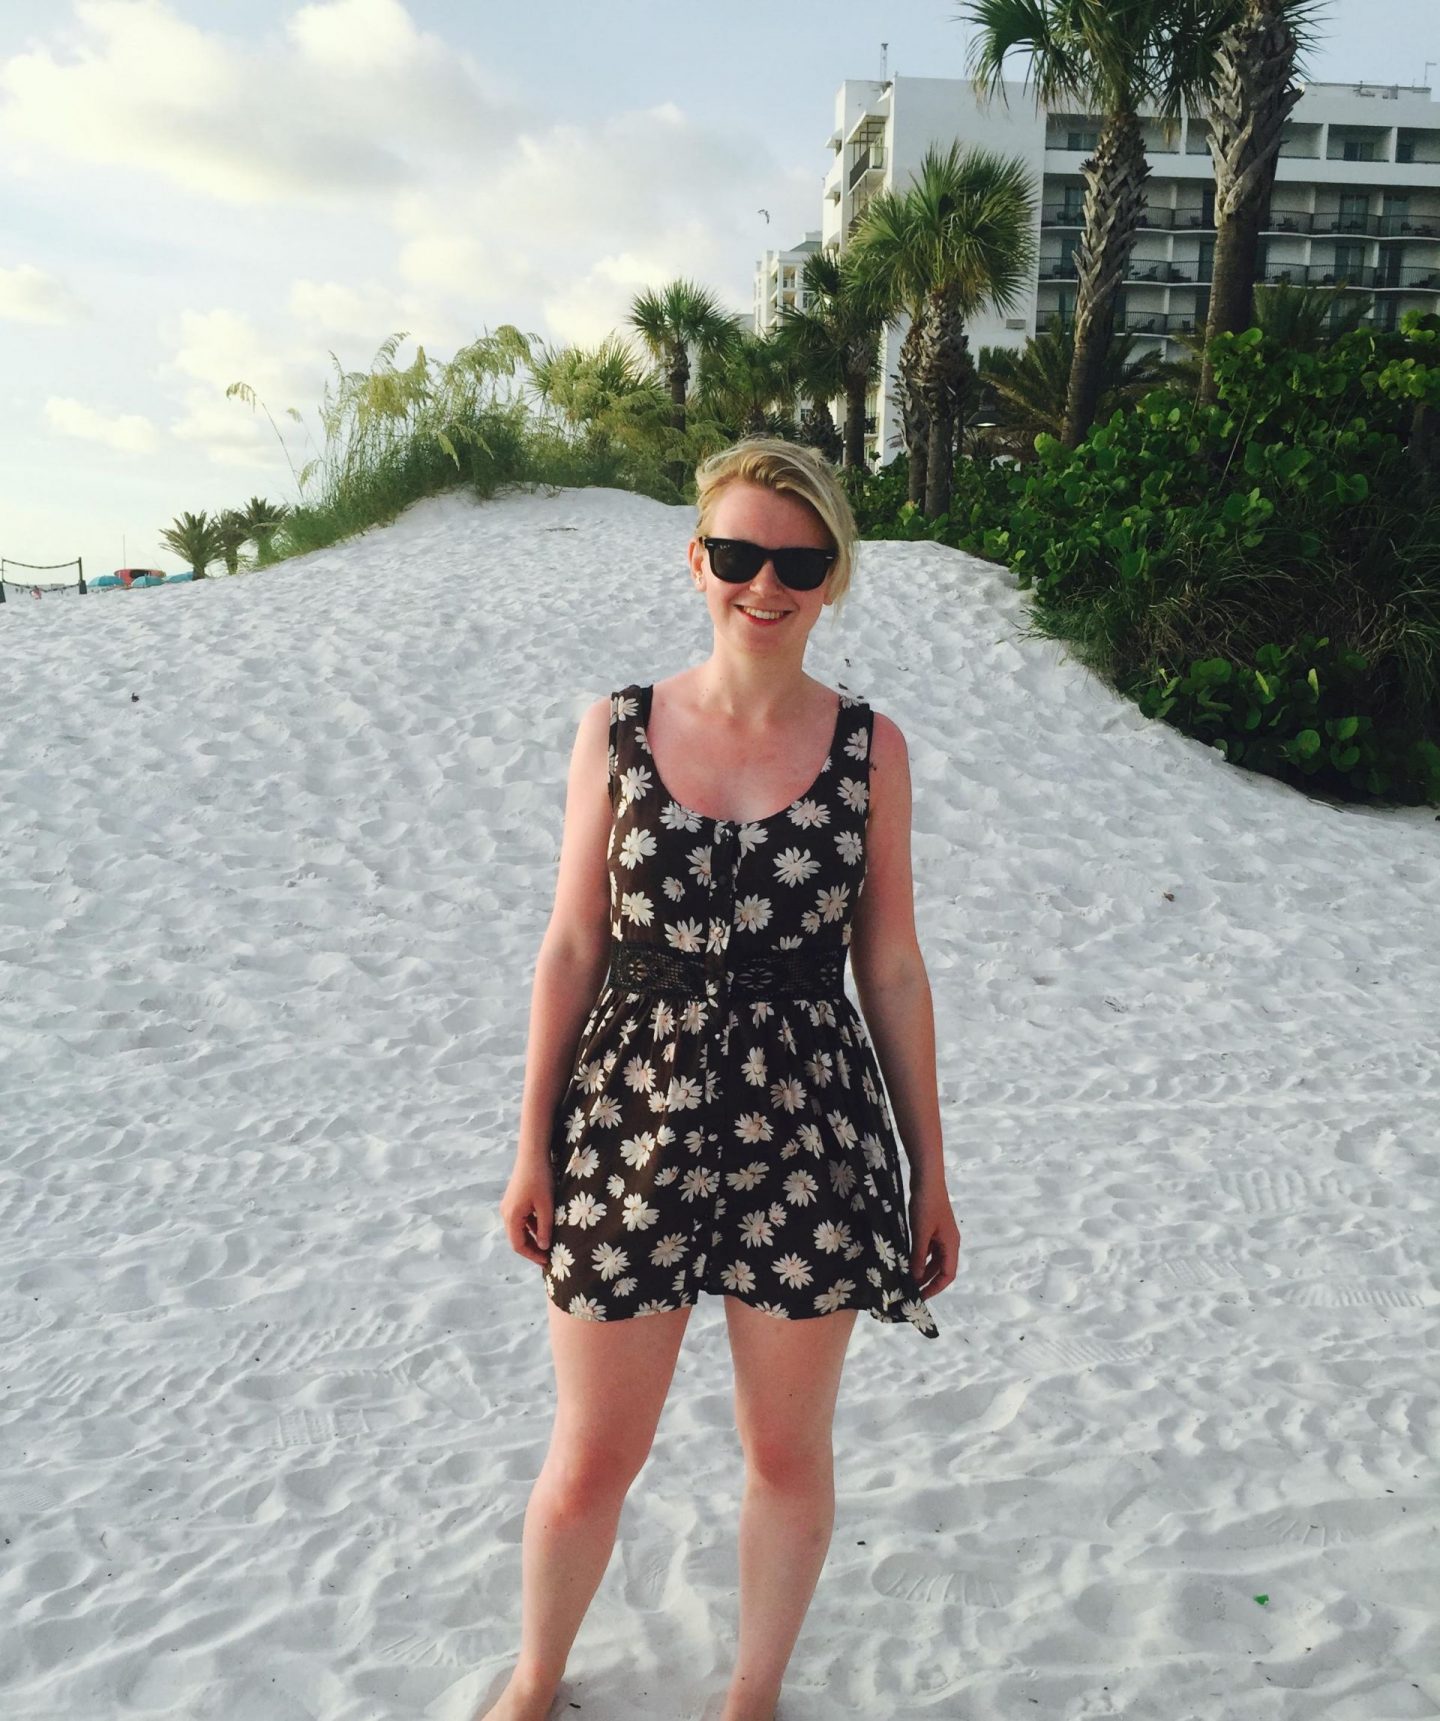 Laura on vacation on Clearwater Beach, Florida